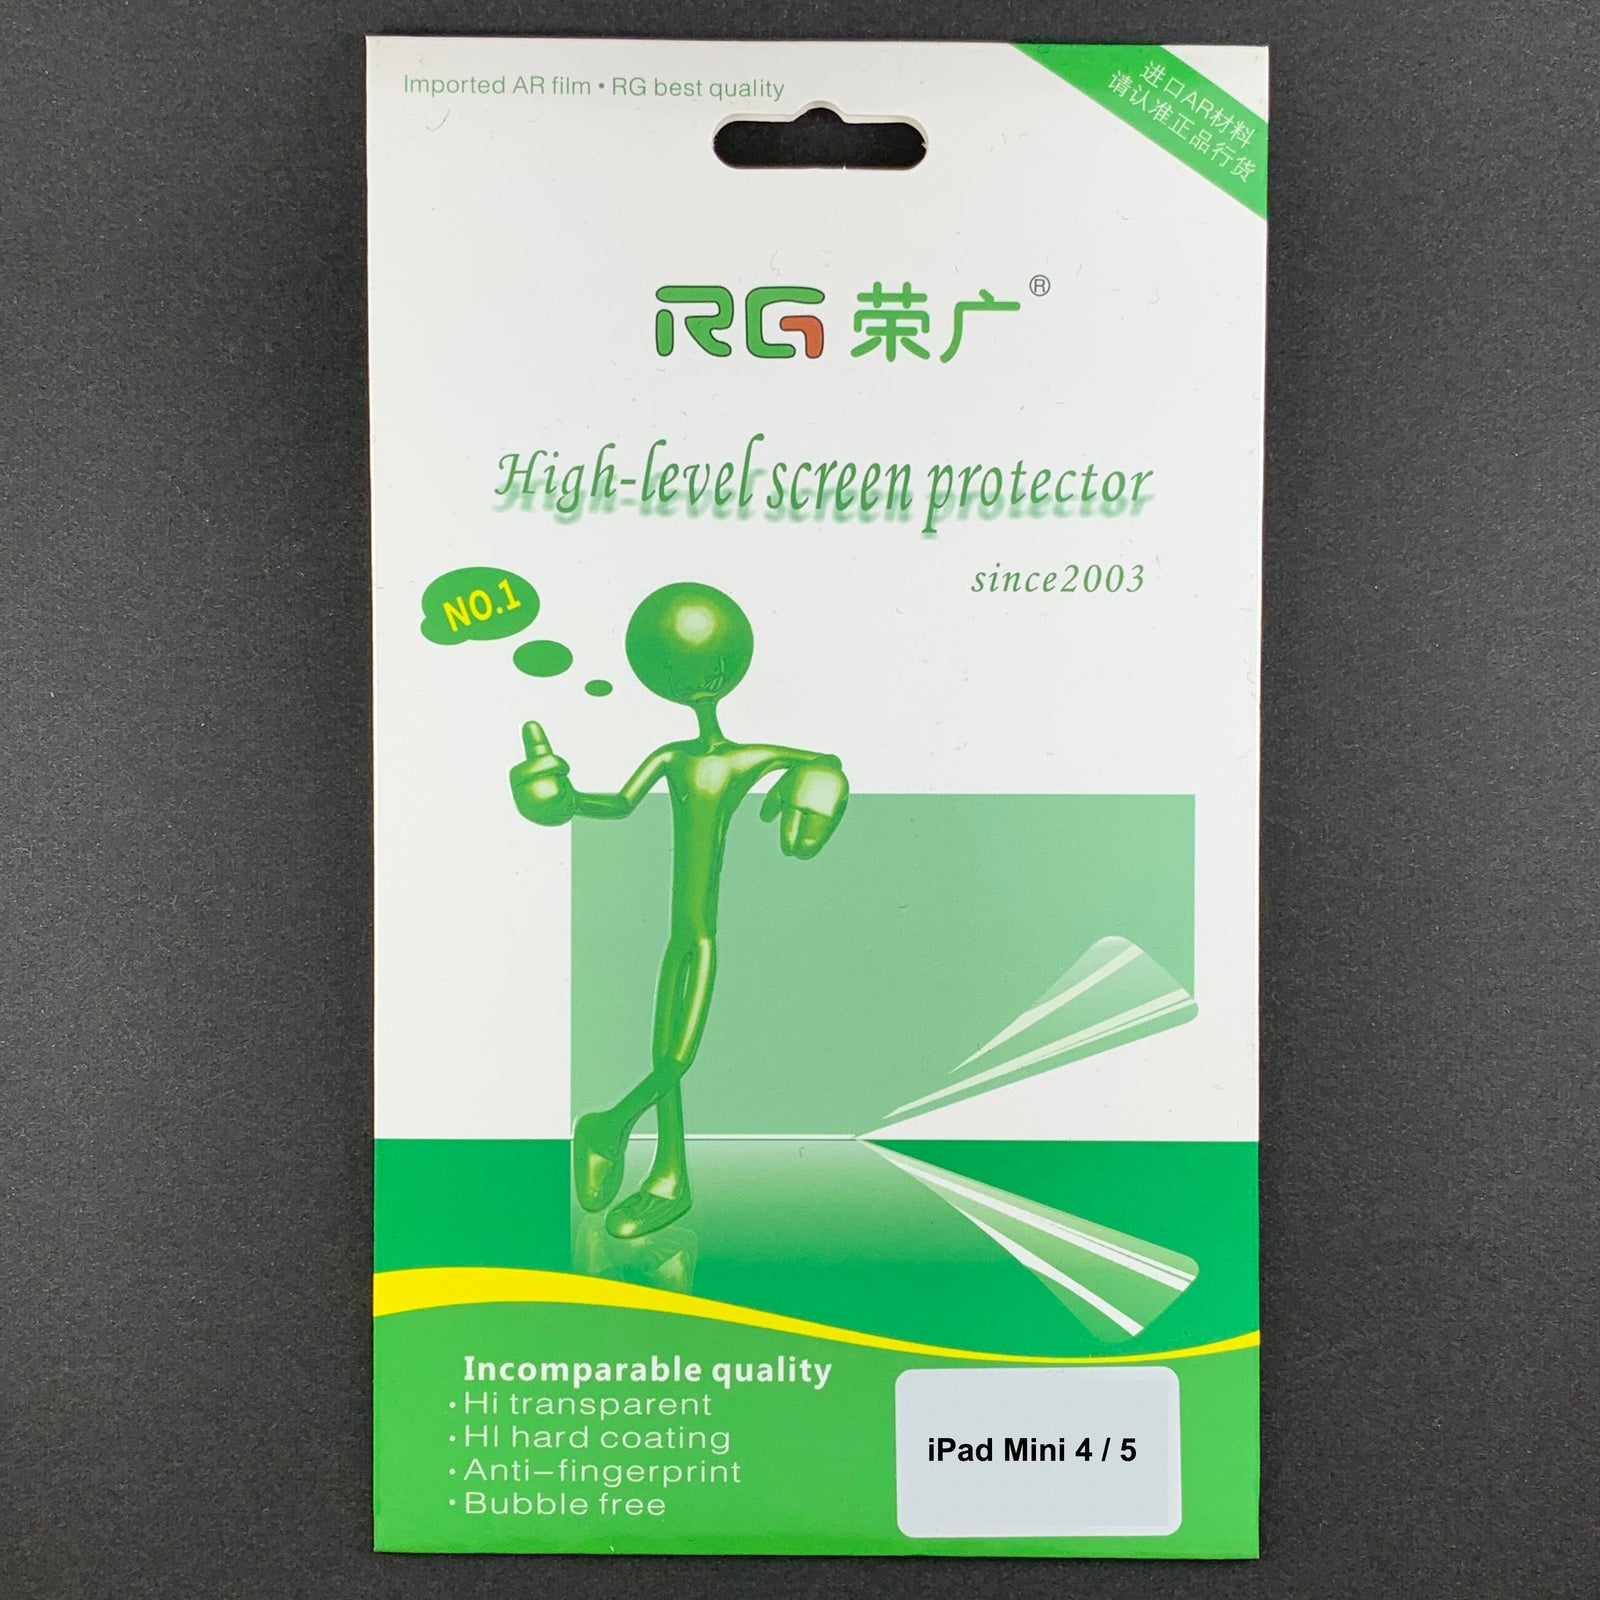 RG Professional Soft Film Screen Protector for iPad Mini 4 / 5 (CLEAR, 2-PACK)